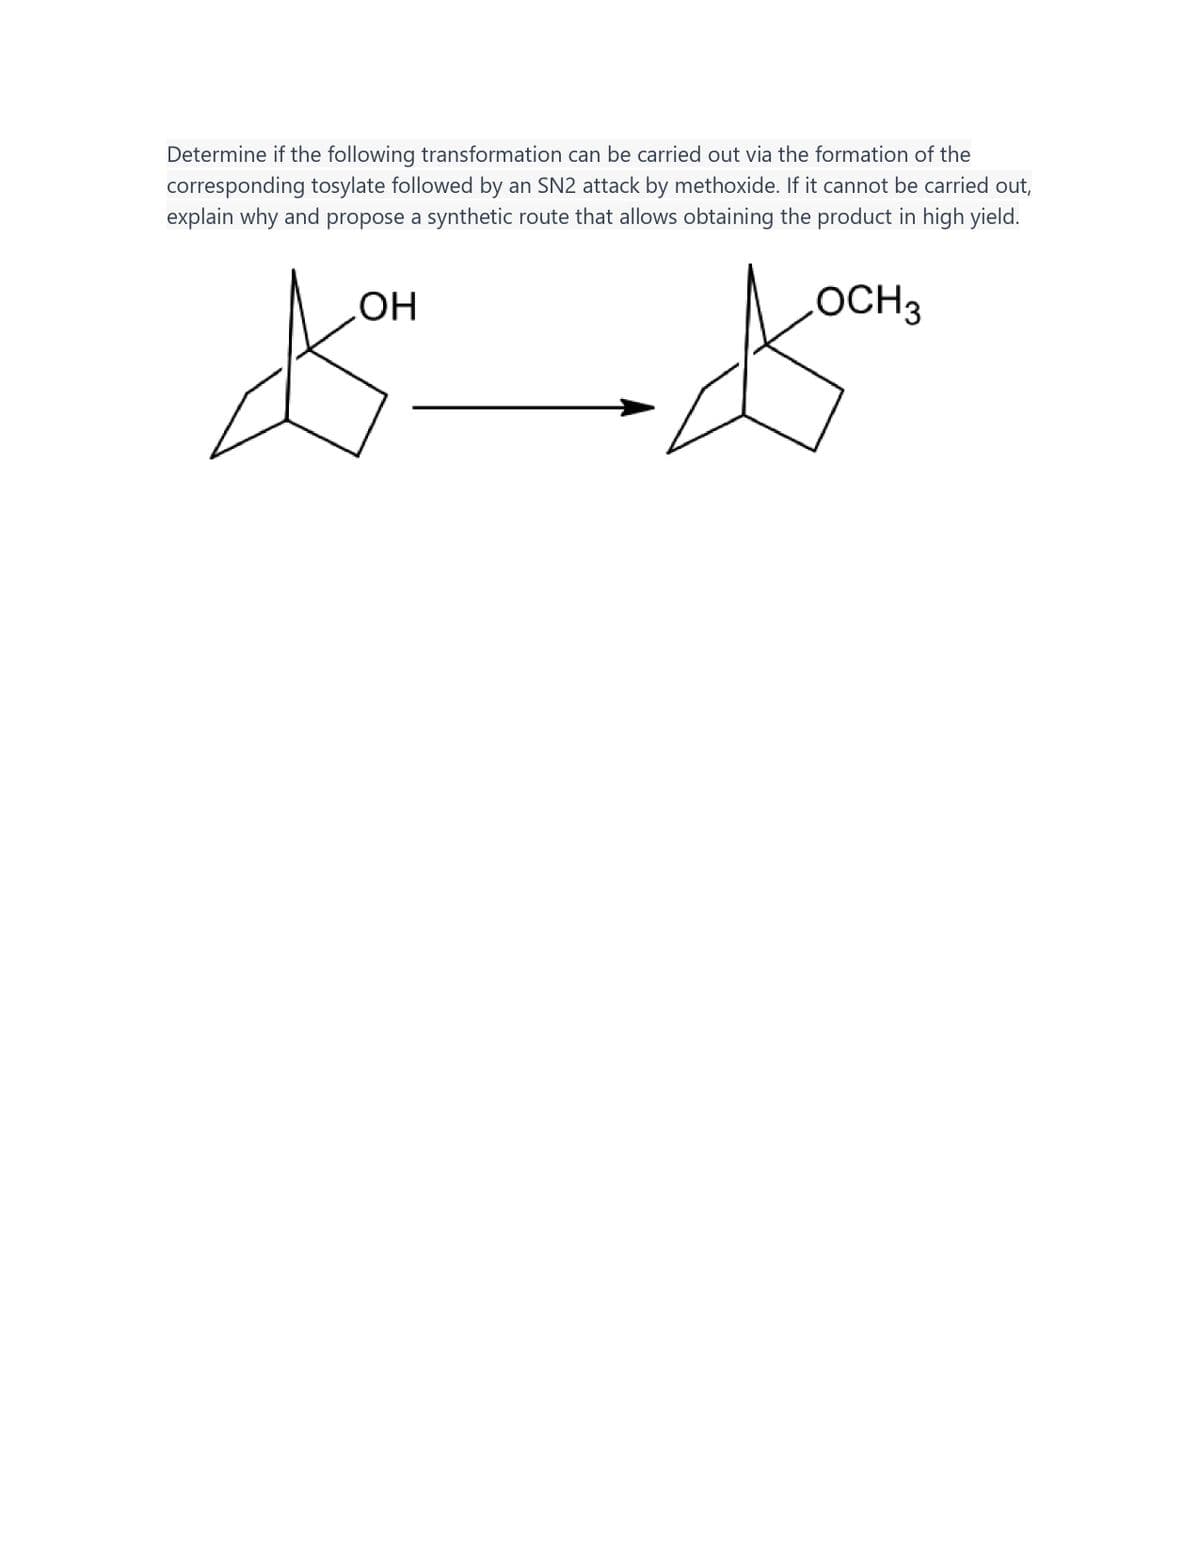 Determine if the following transformation can be carried out via the formation of the
corresponding tosylate followed by an SN2 attack by methoxide. If it cannot be carried out,
explain why and propose a synthetic route that allows obtaining the product in high yield.
OH
OCH 3
to doon